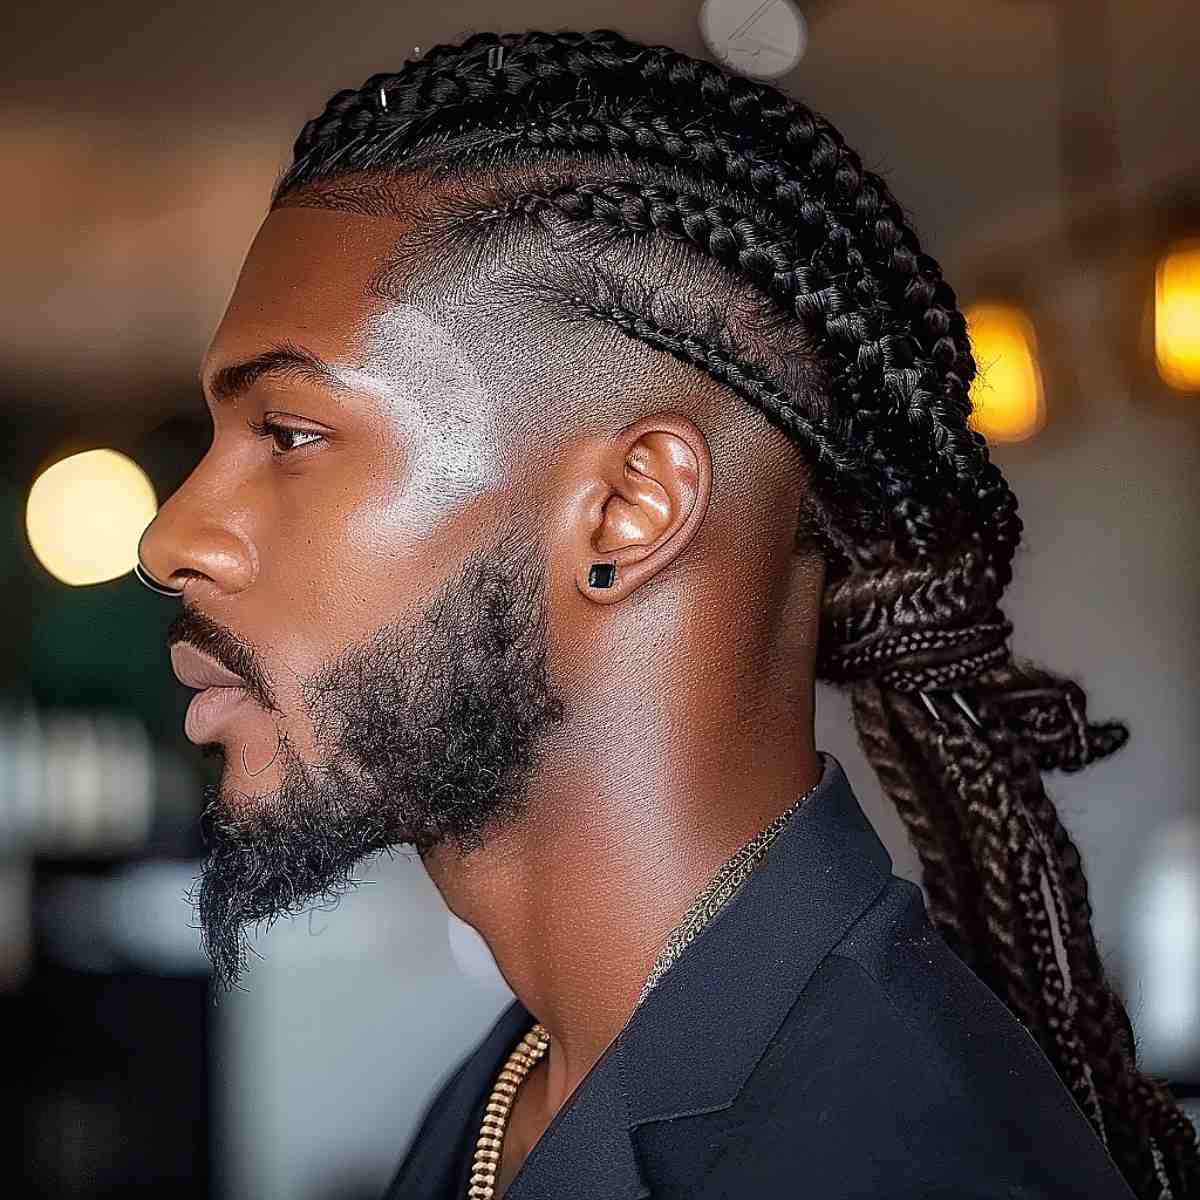 Men's Braid Hairstyle for Black Hair! | Quick & Easy for LAZY days! -  YouTube